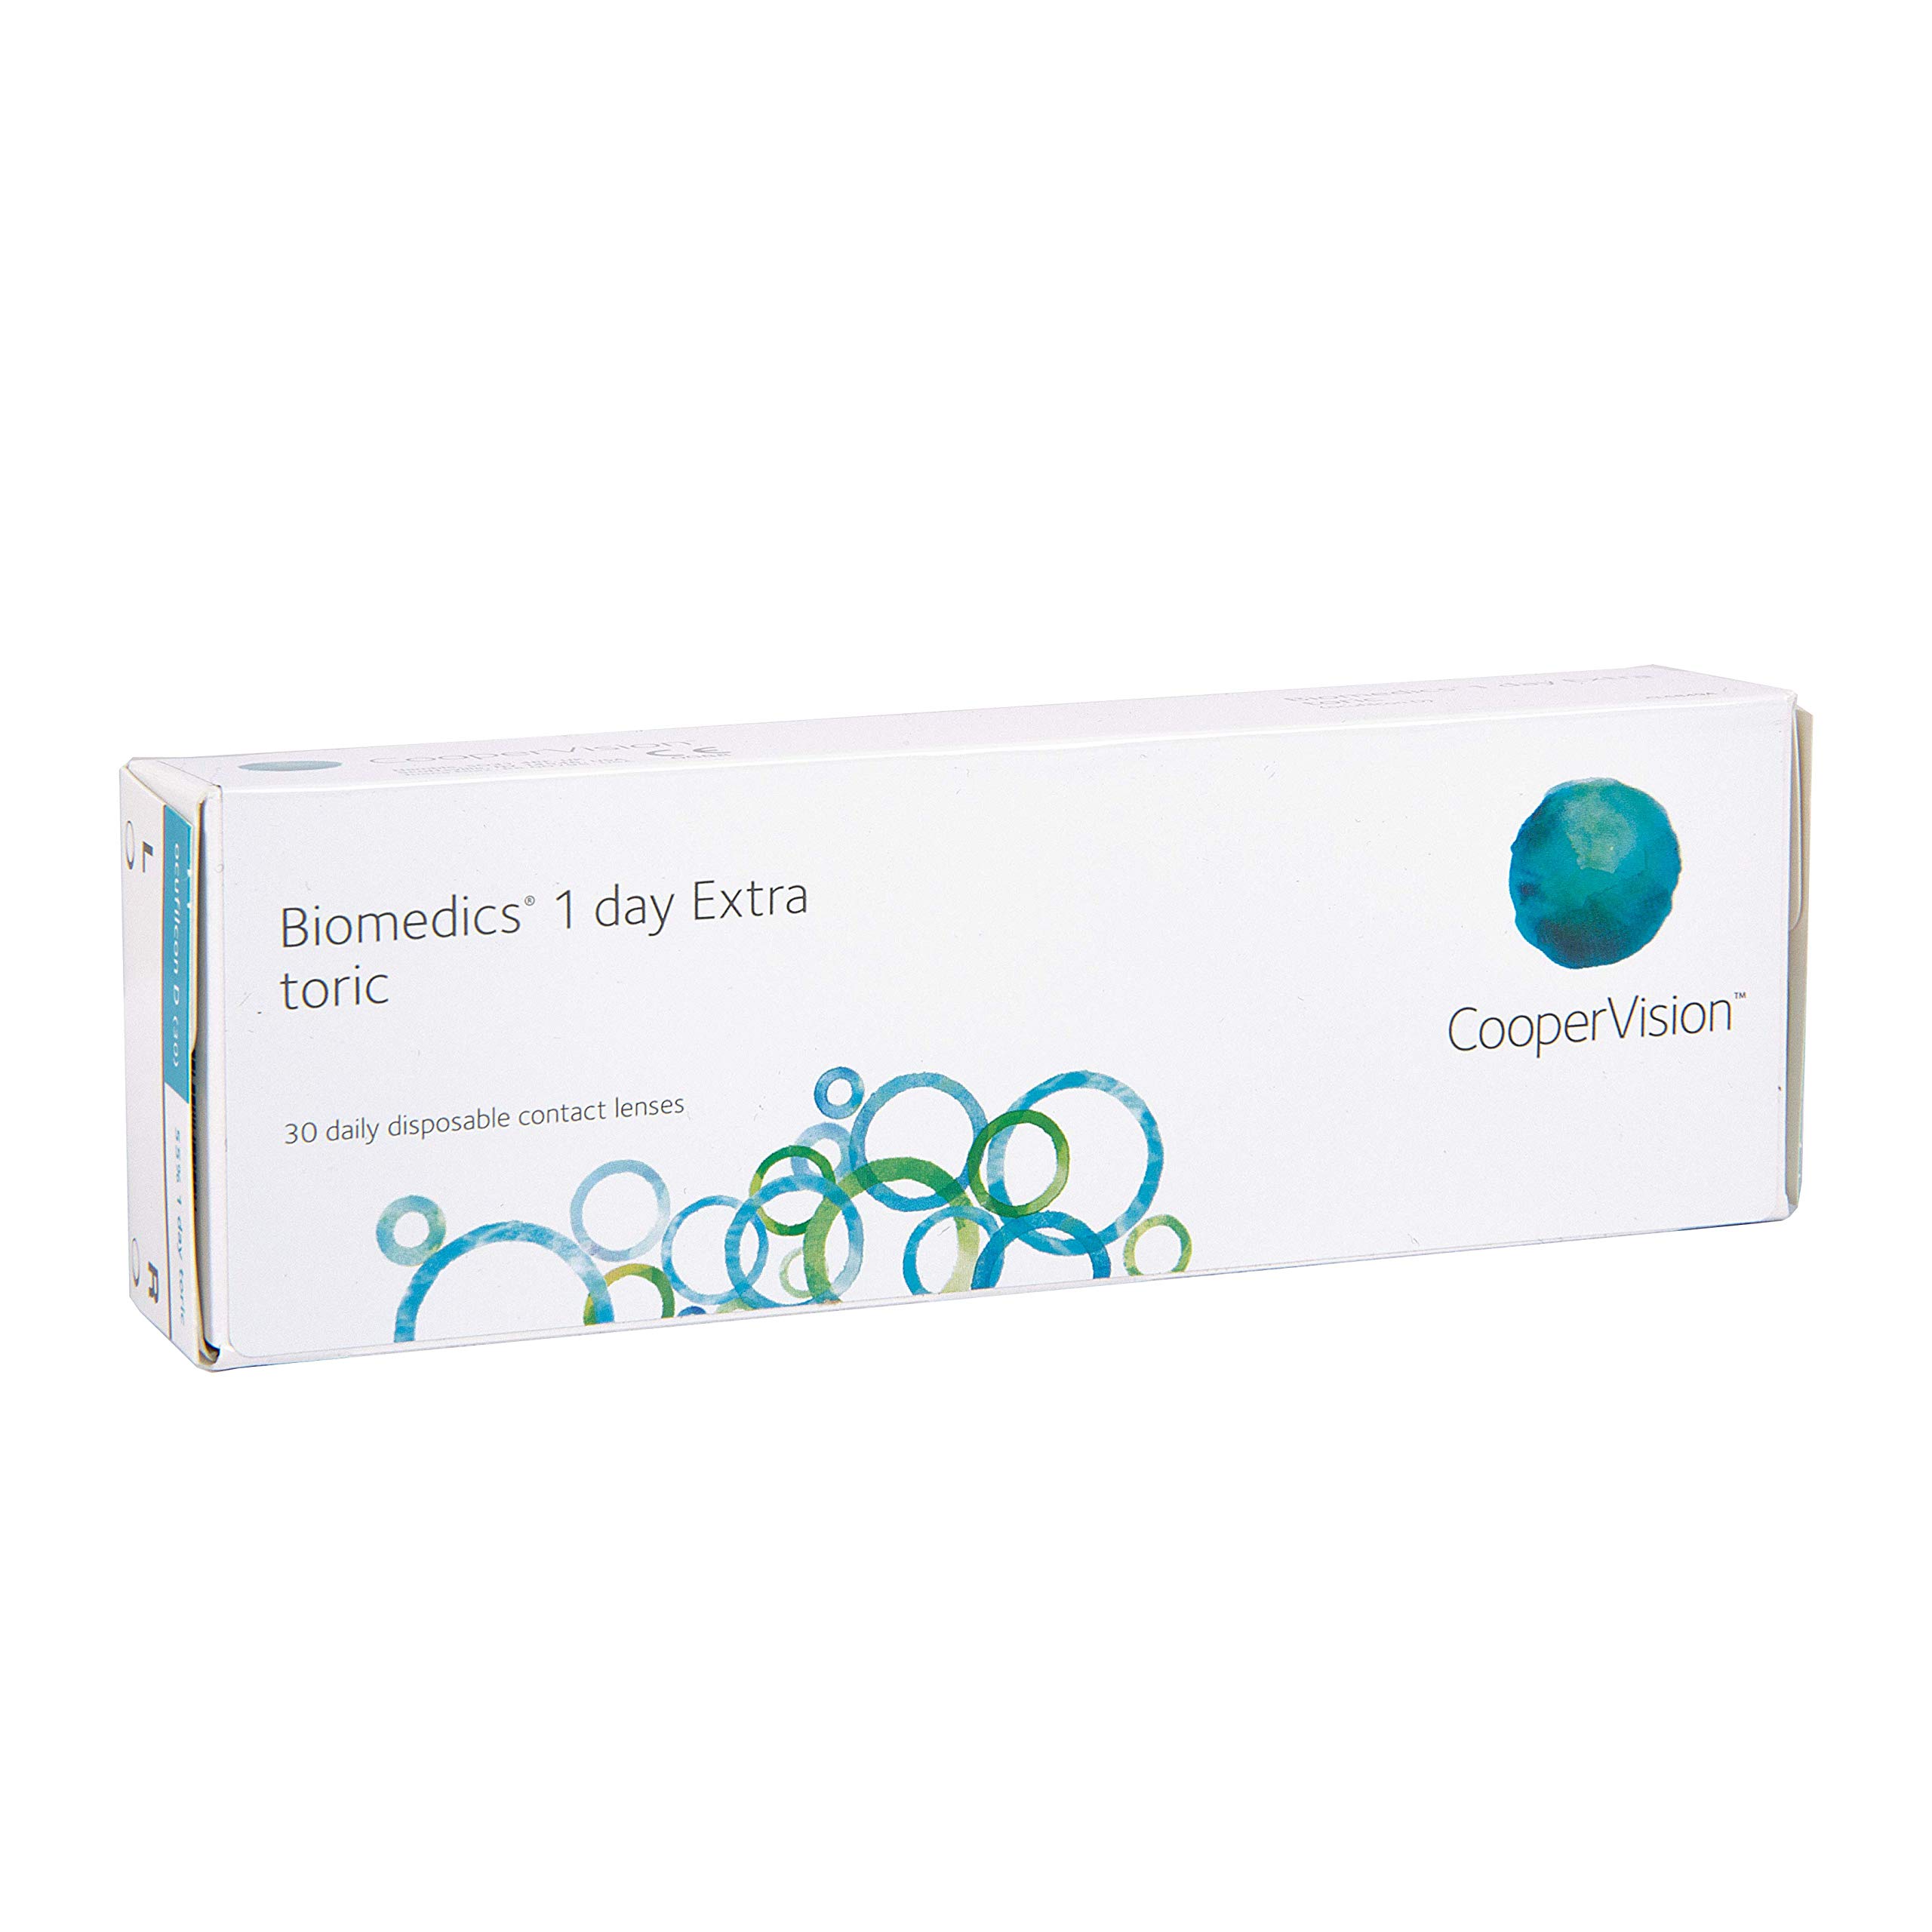 Biomedics 1Day Extra toric Tageslinsen weich, 30 Stück/BC 8.7 mm/DIA 14.5 mm/CYL -1.75 / ACHSE 160 / -4.25 Dioptrien